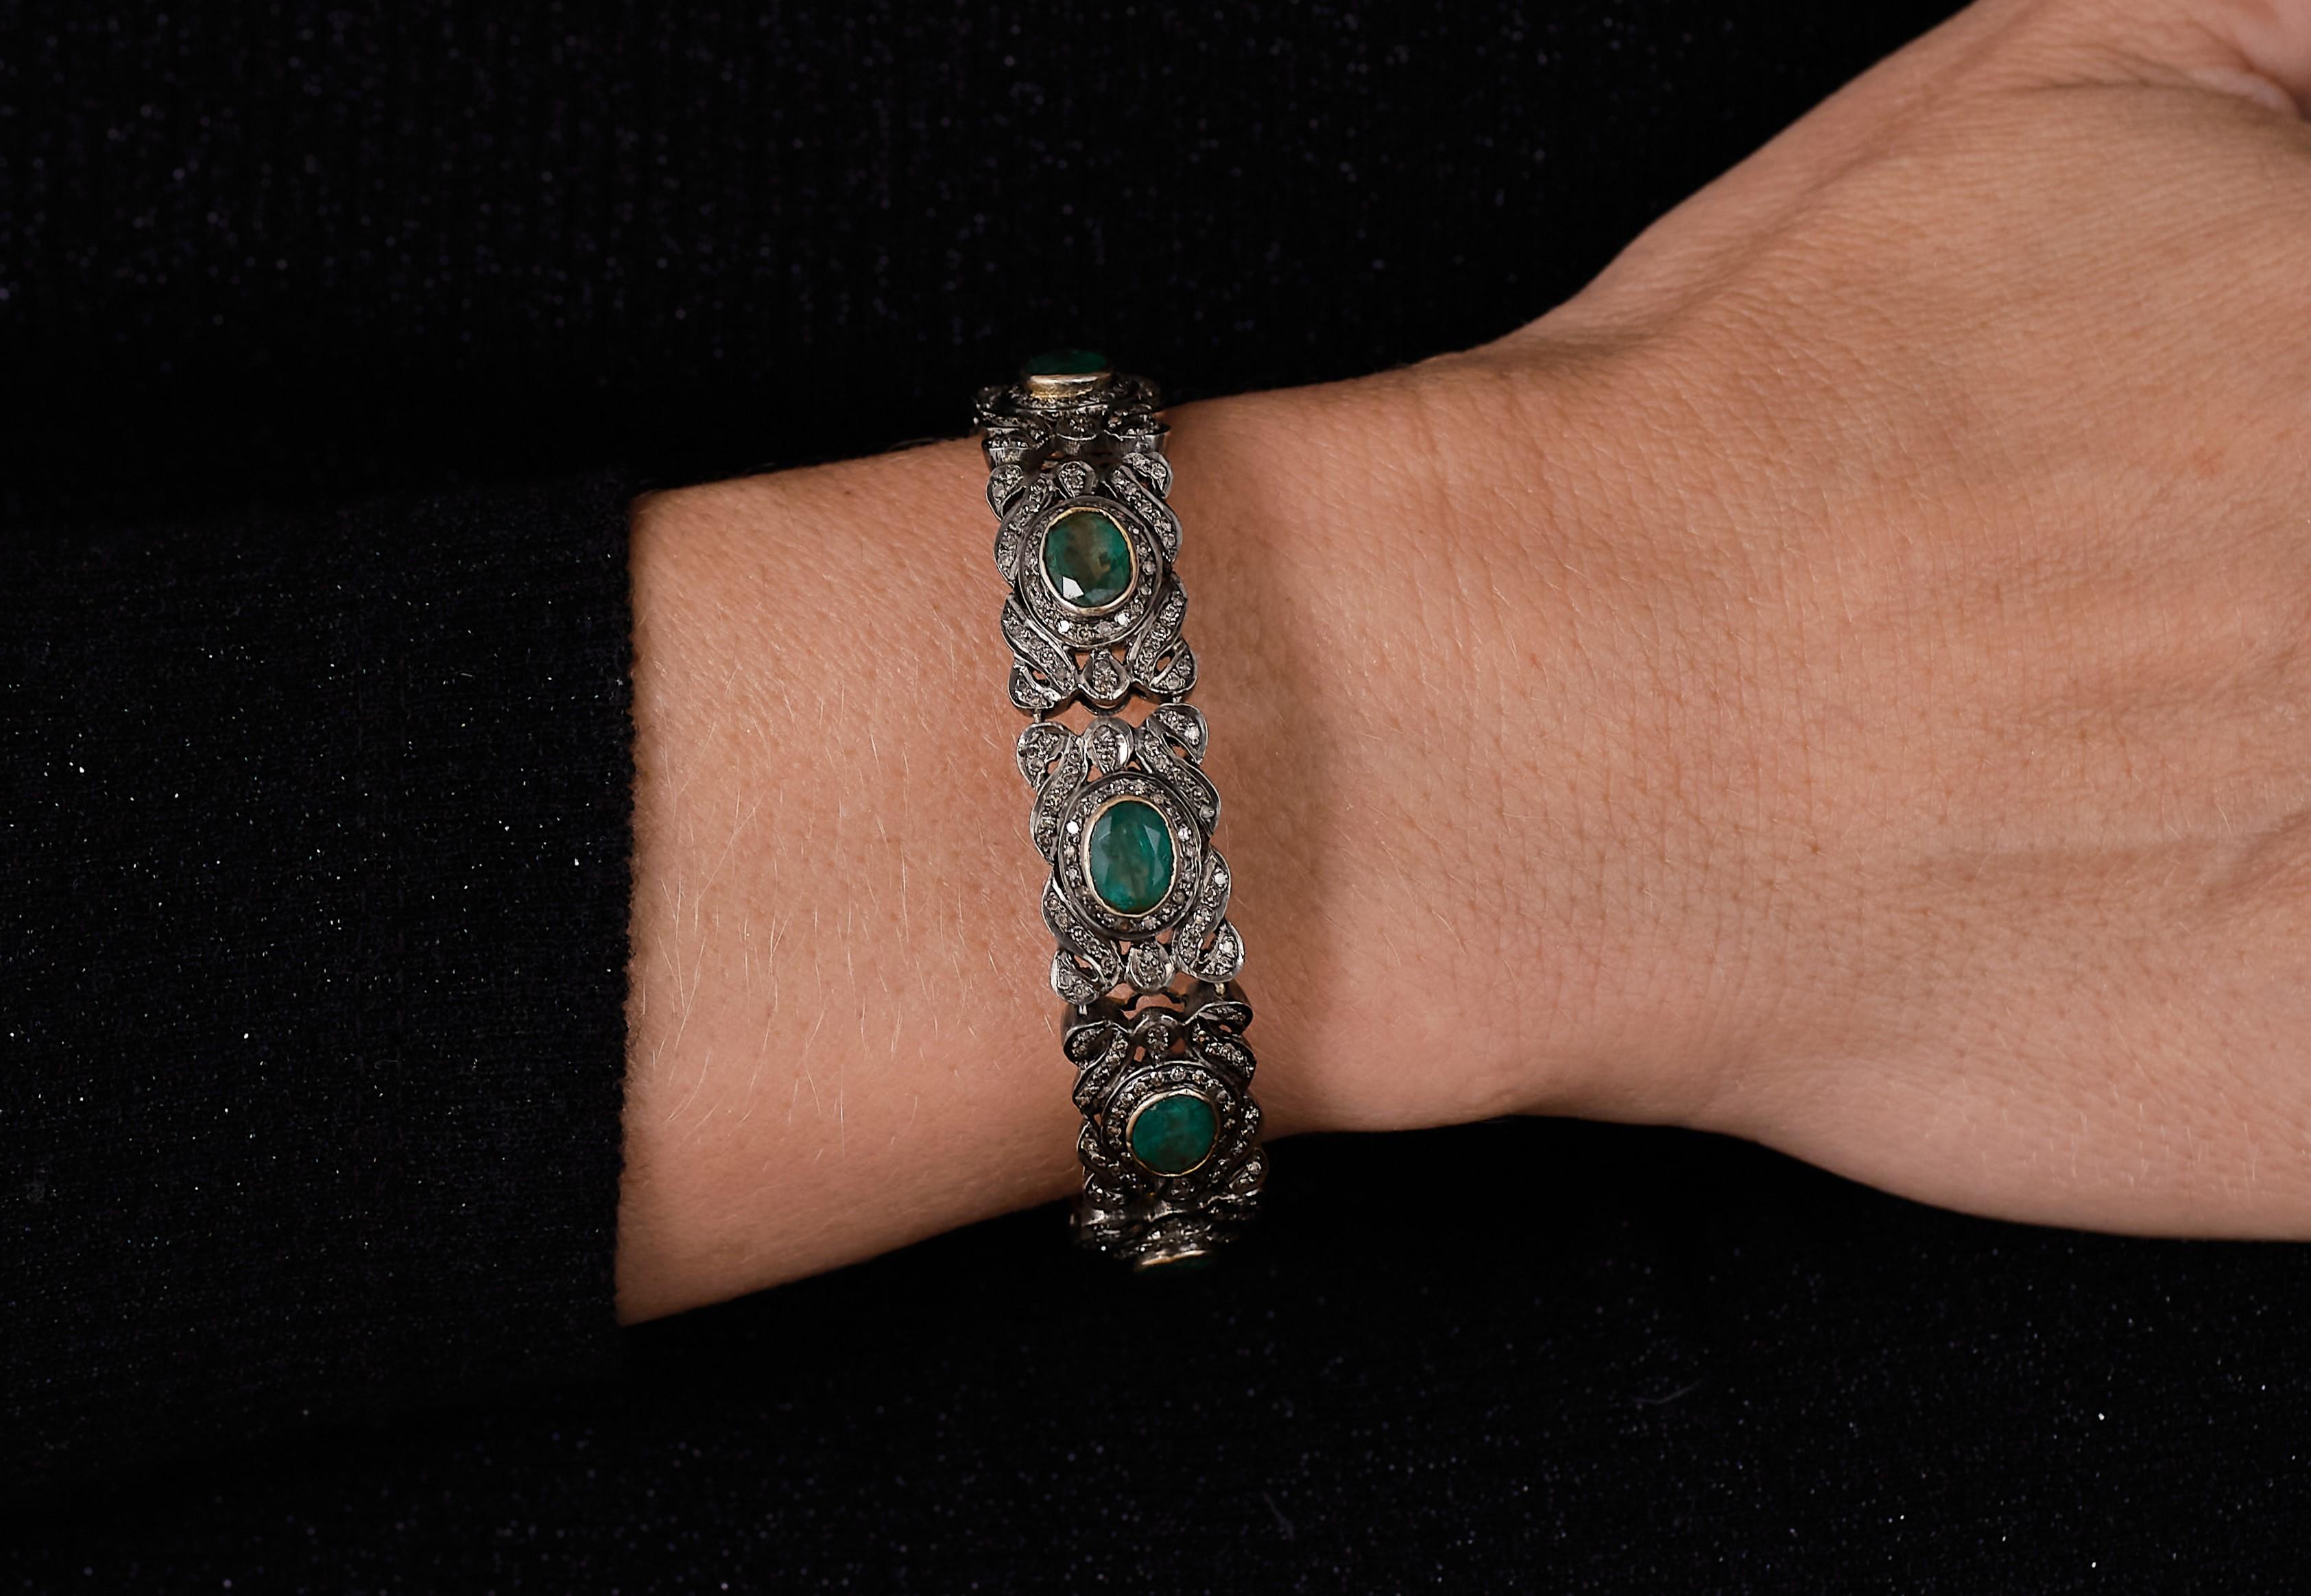 Antique old world Belle époque emerald bracelet,  

Alluring and mesmerizing darkened silver accentuated by lush deep green emeralds. An elegant evening piece evoking history. 

Hand crafted in yellow 14 karat gold, partly bound with silver,